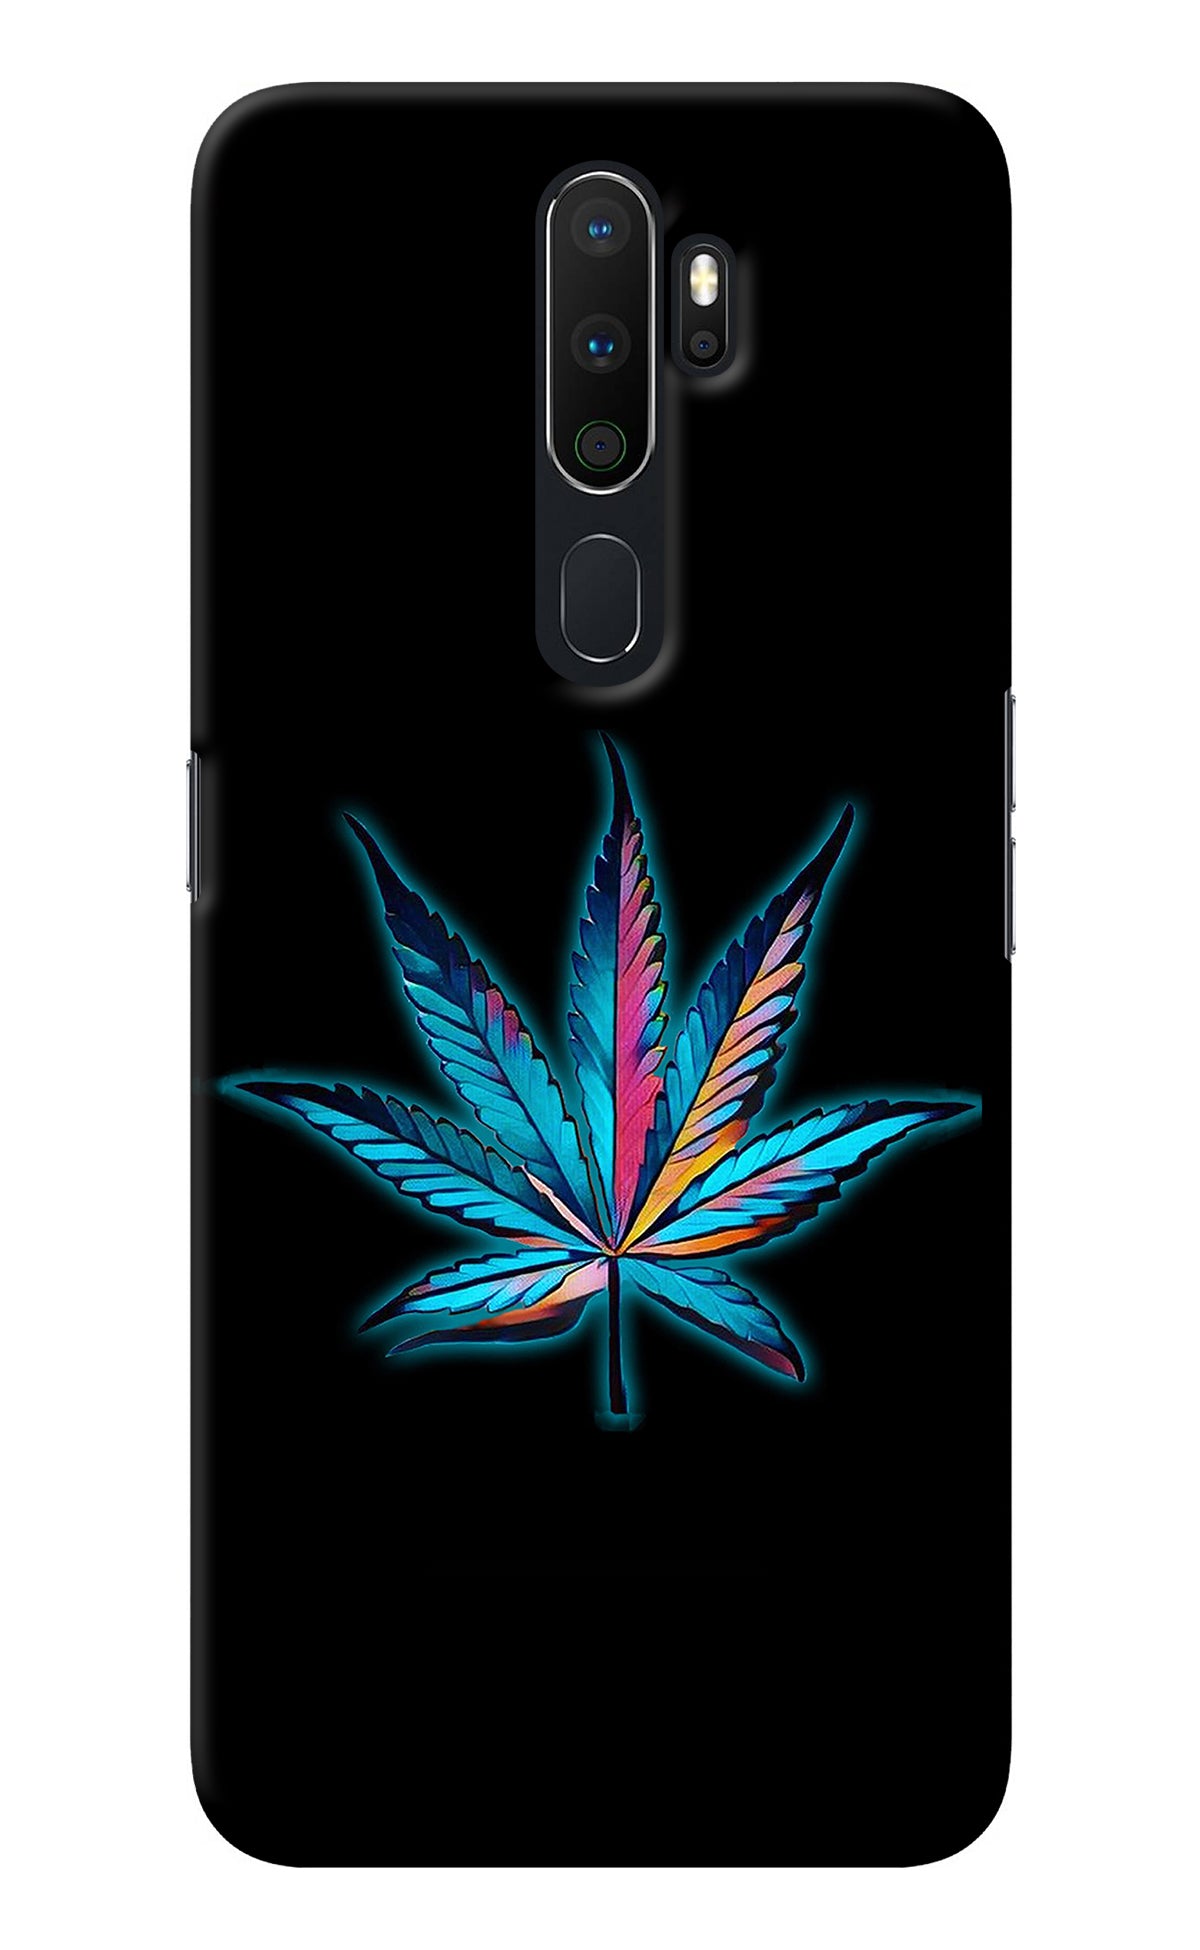 Weed Oppo A5 2020/A9 2020 Back Cover